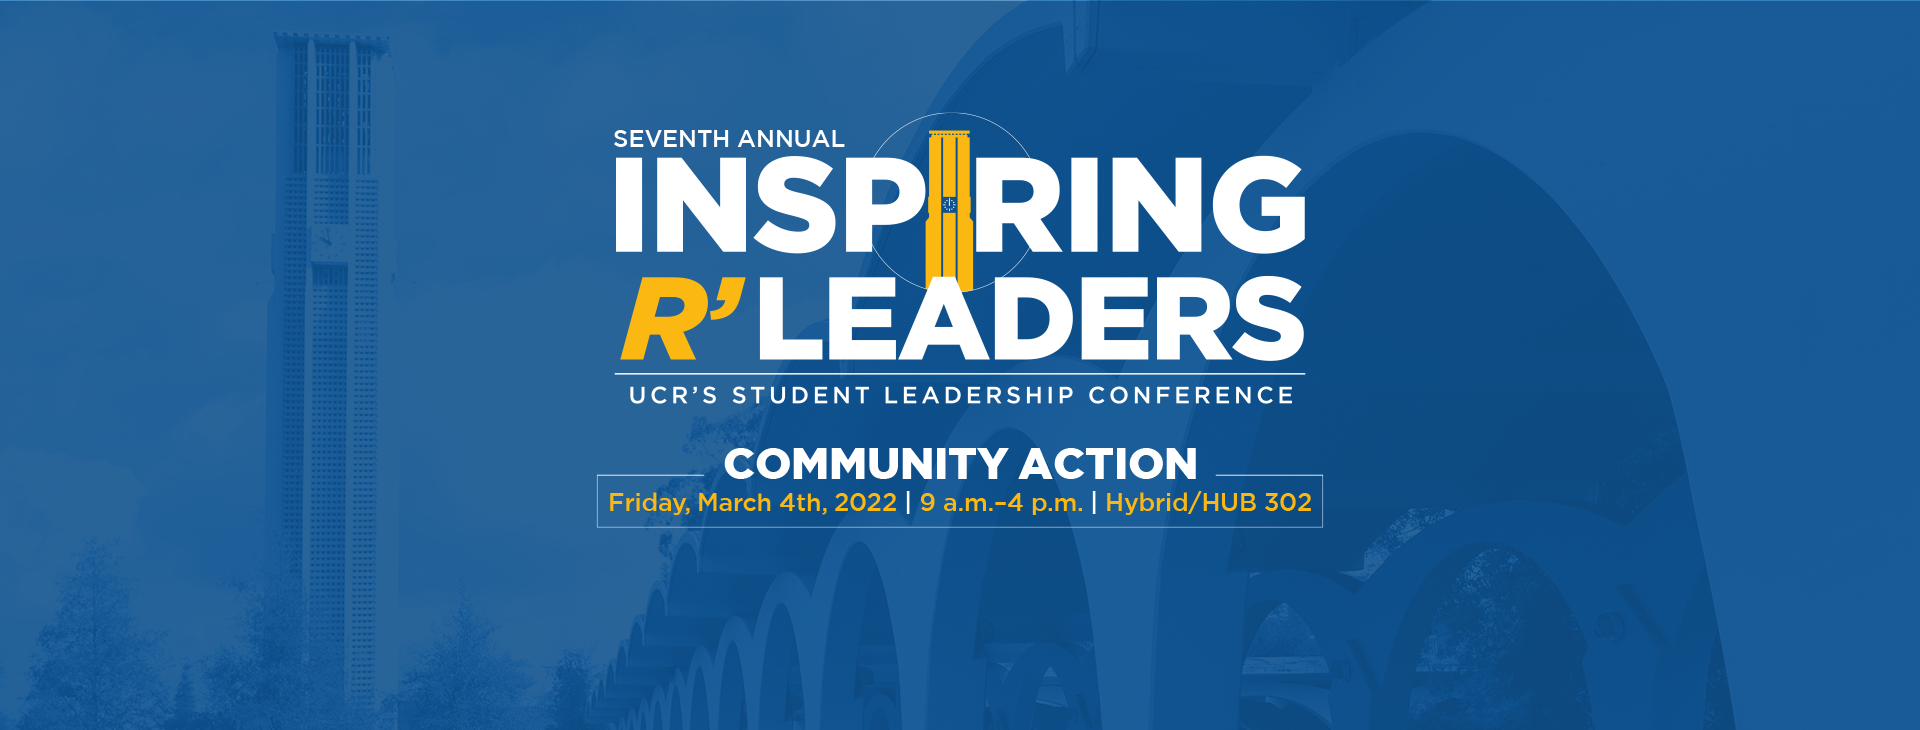 Inspiring R'Leaders Seventh Annual Student Leadership Conference